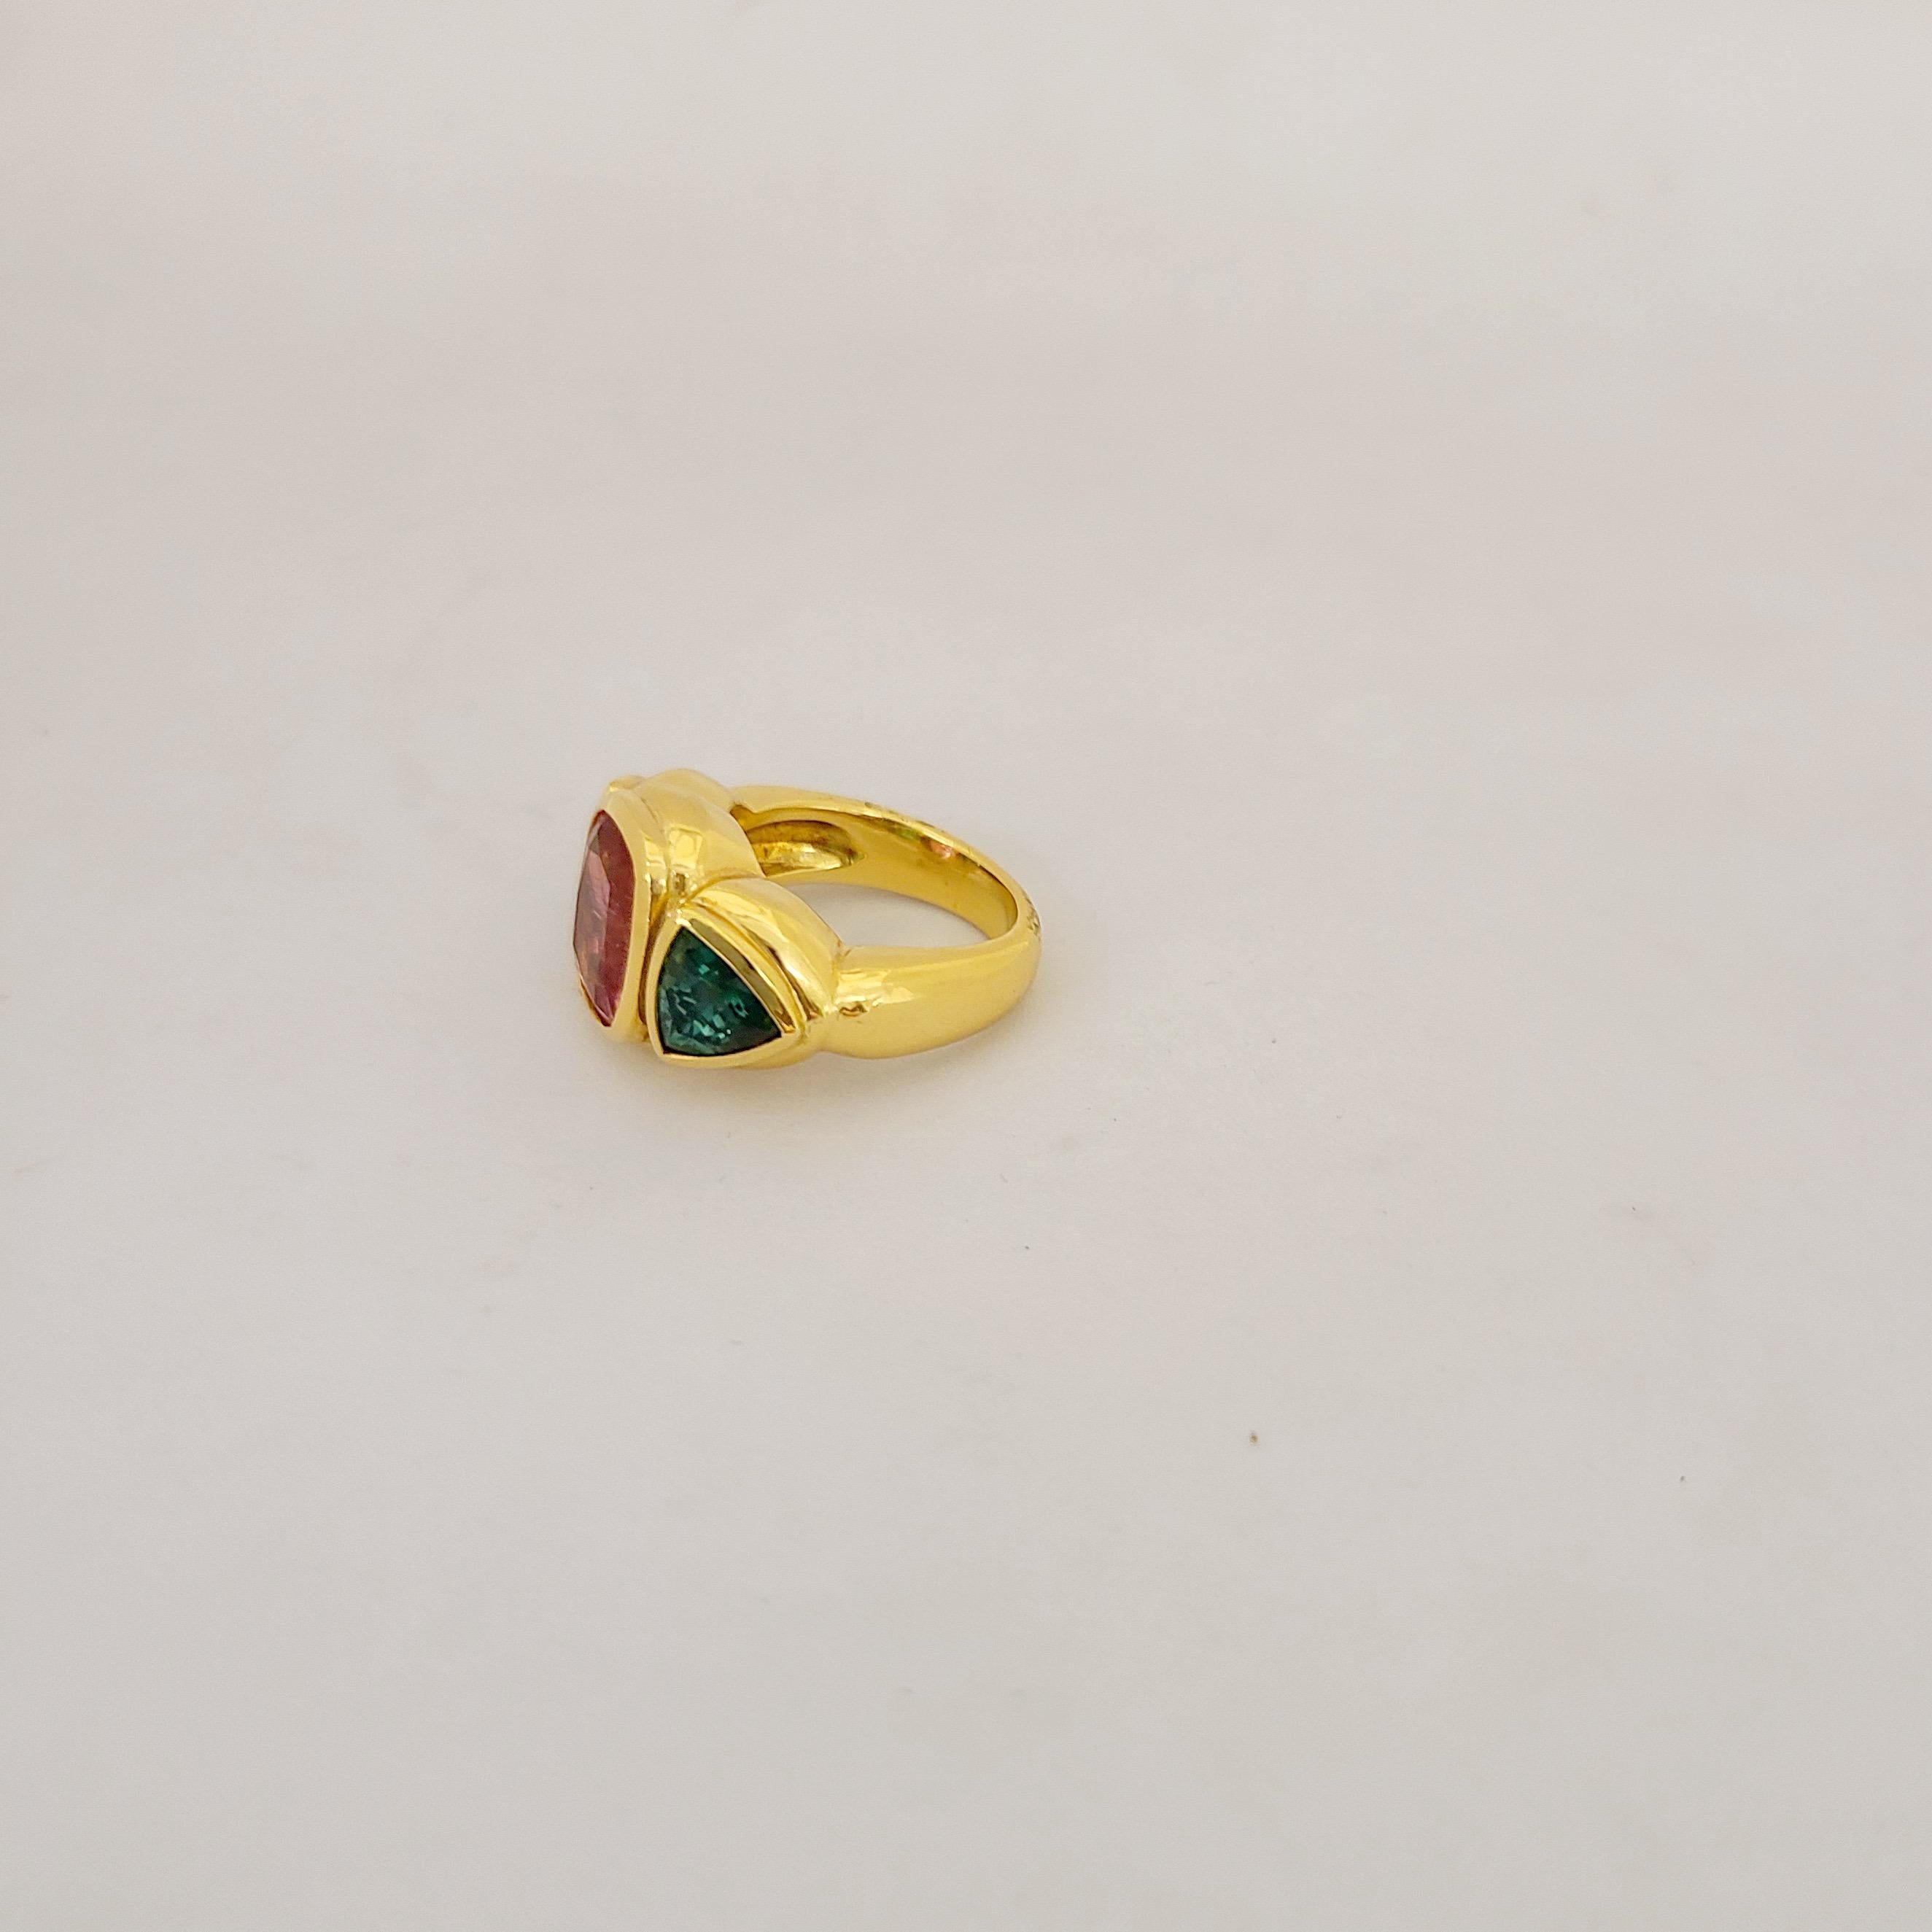 Designed for Cellini this one of a kind ring is set with a cushion shaped rubelite center stone flanked by 2 green tourmaline trillion cut stones. Each stone is set in it's own gold bezel in this lovely handmade mounting.
Total stone weight 6.63